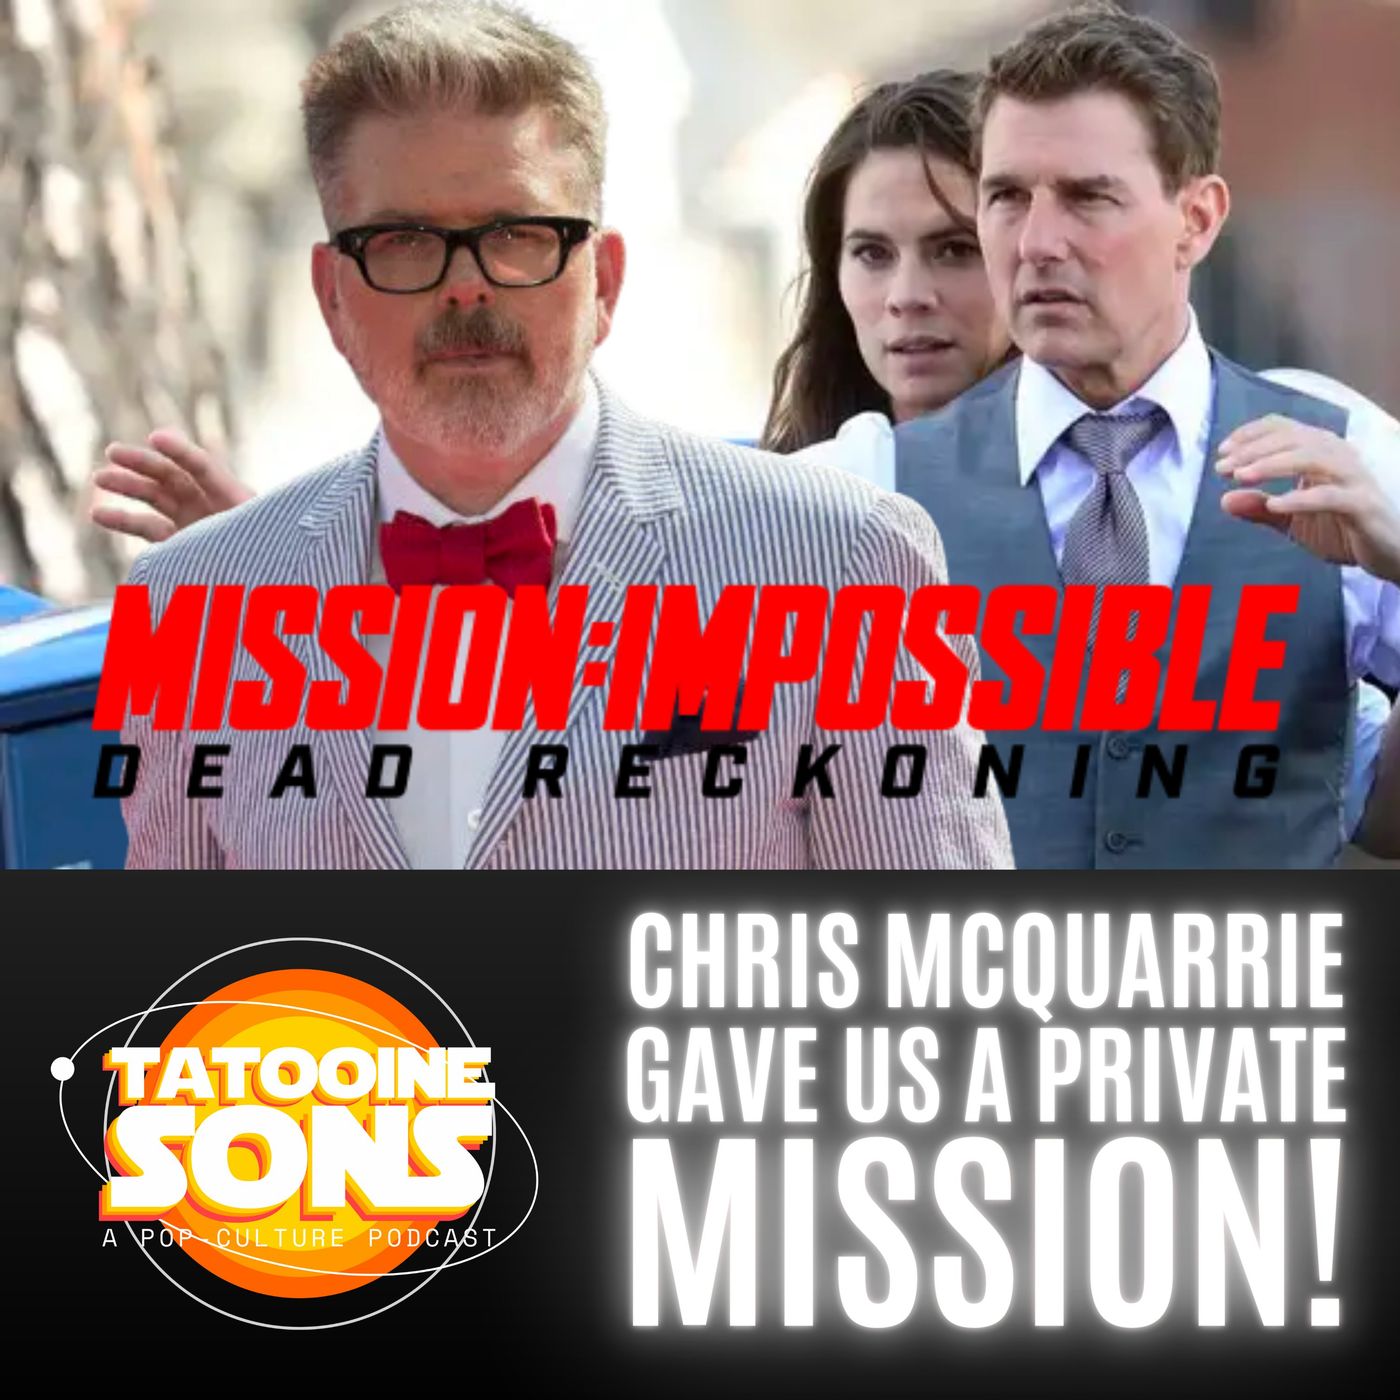 Chris McQuarrie Gave Us a Private Mission!